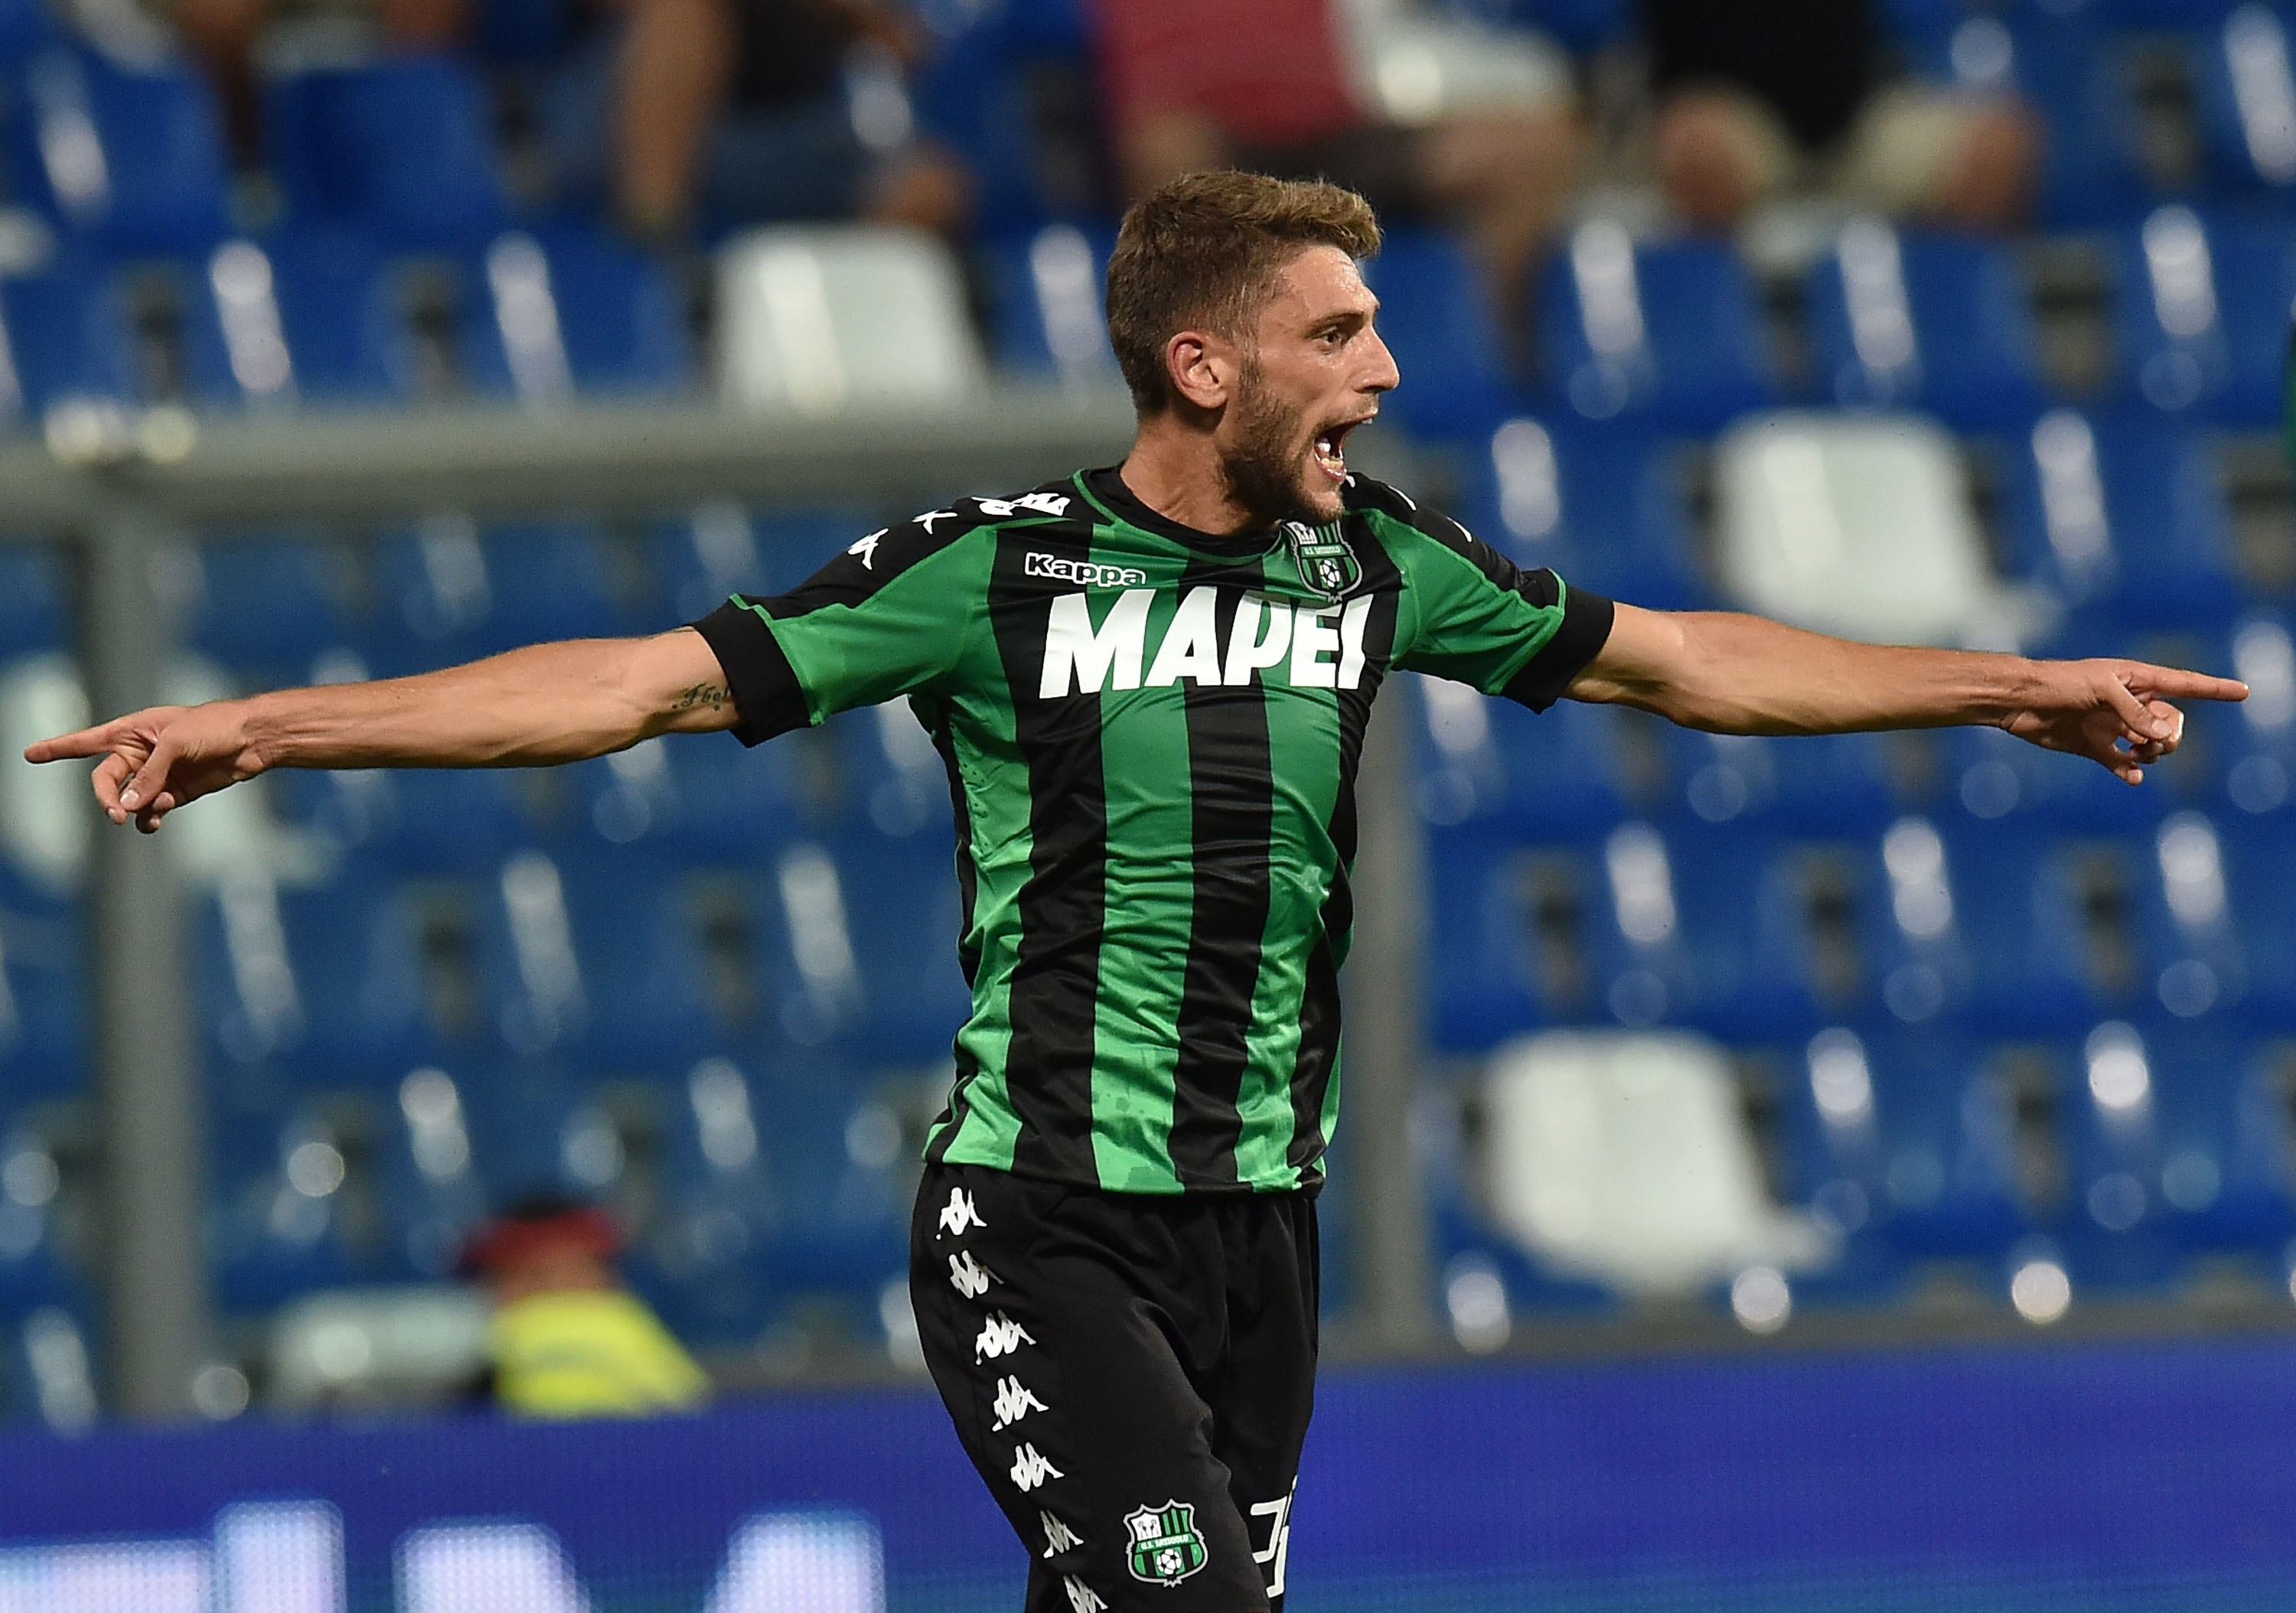 Carnevali: “We know about Inter’s interest in Berardi, but a lot of teams like him.”